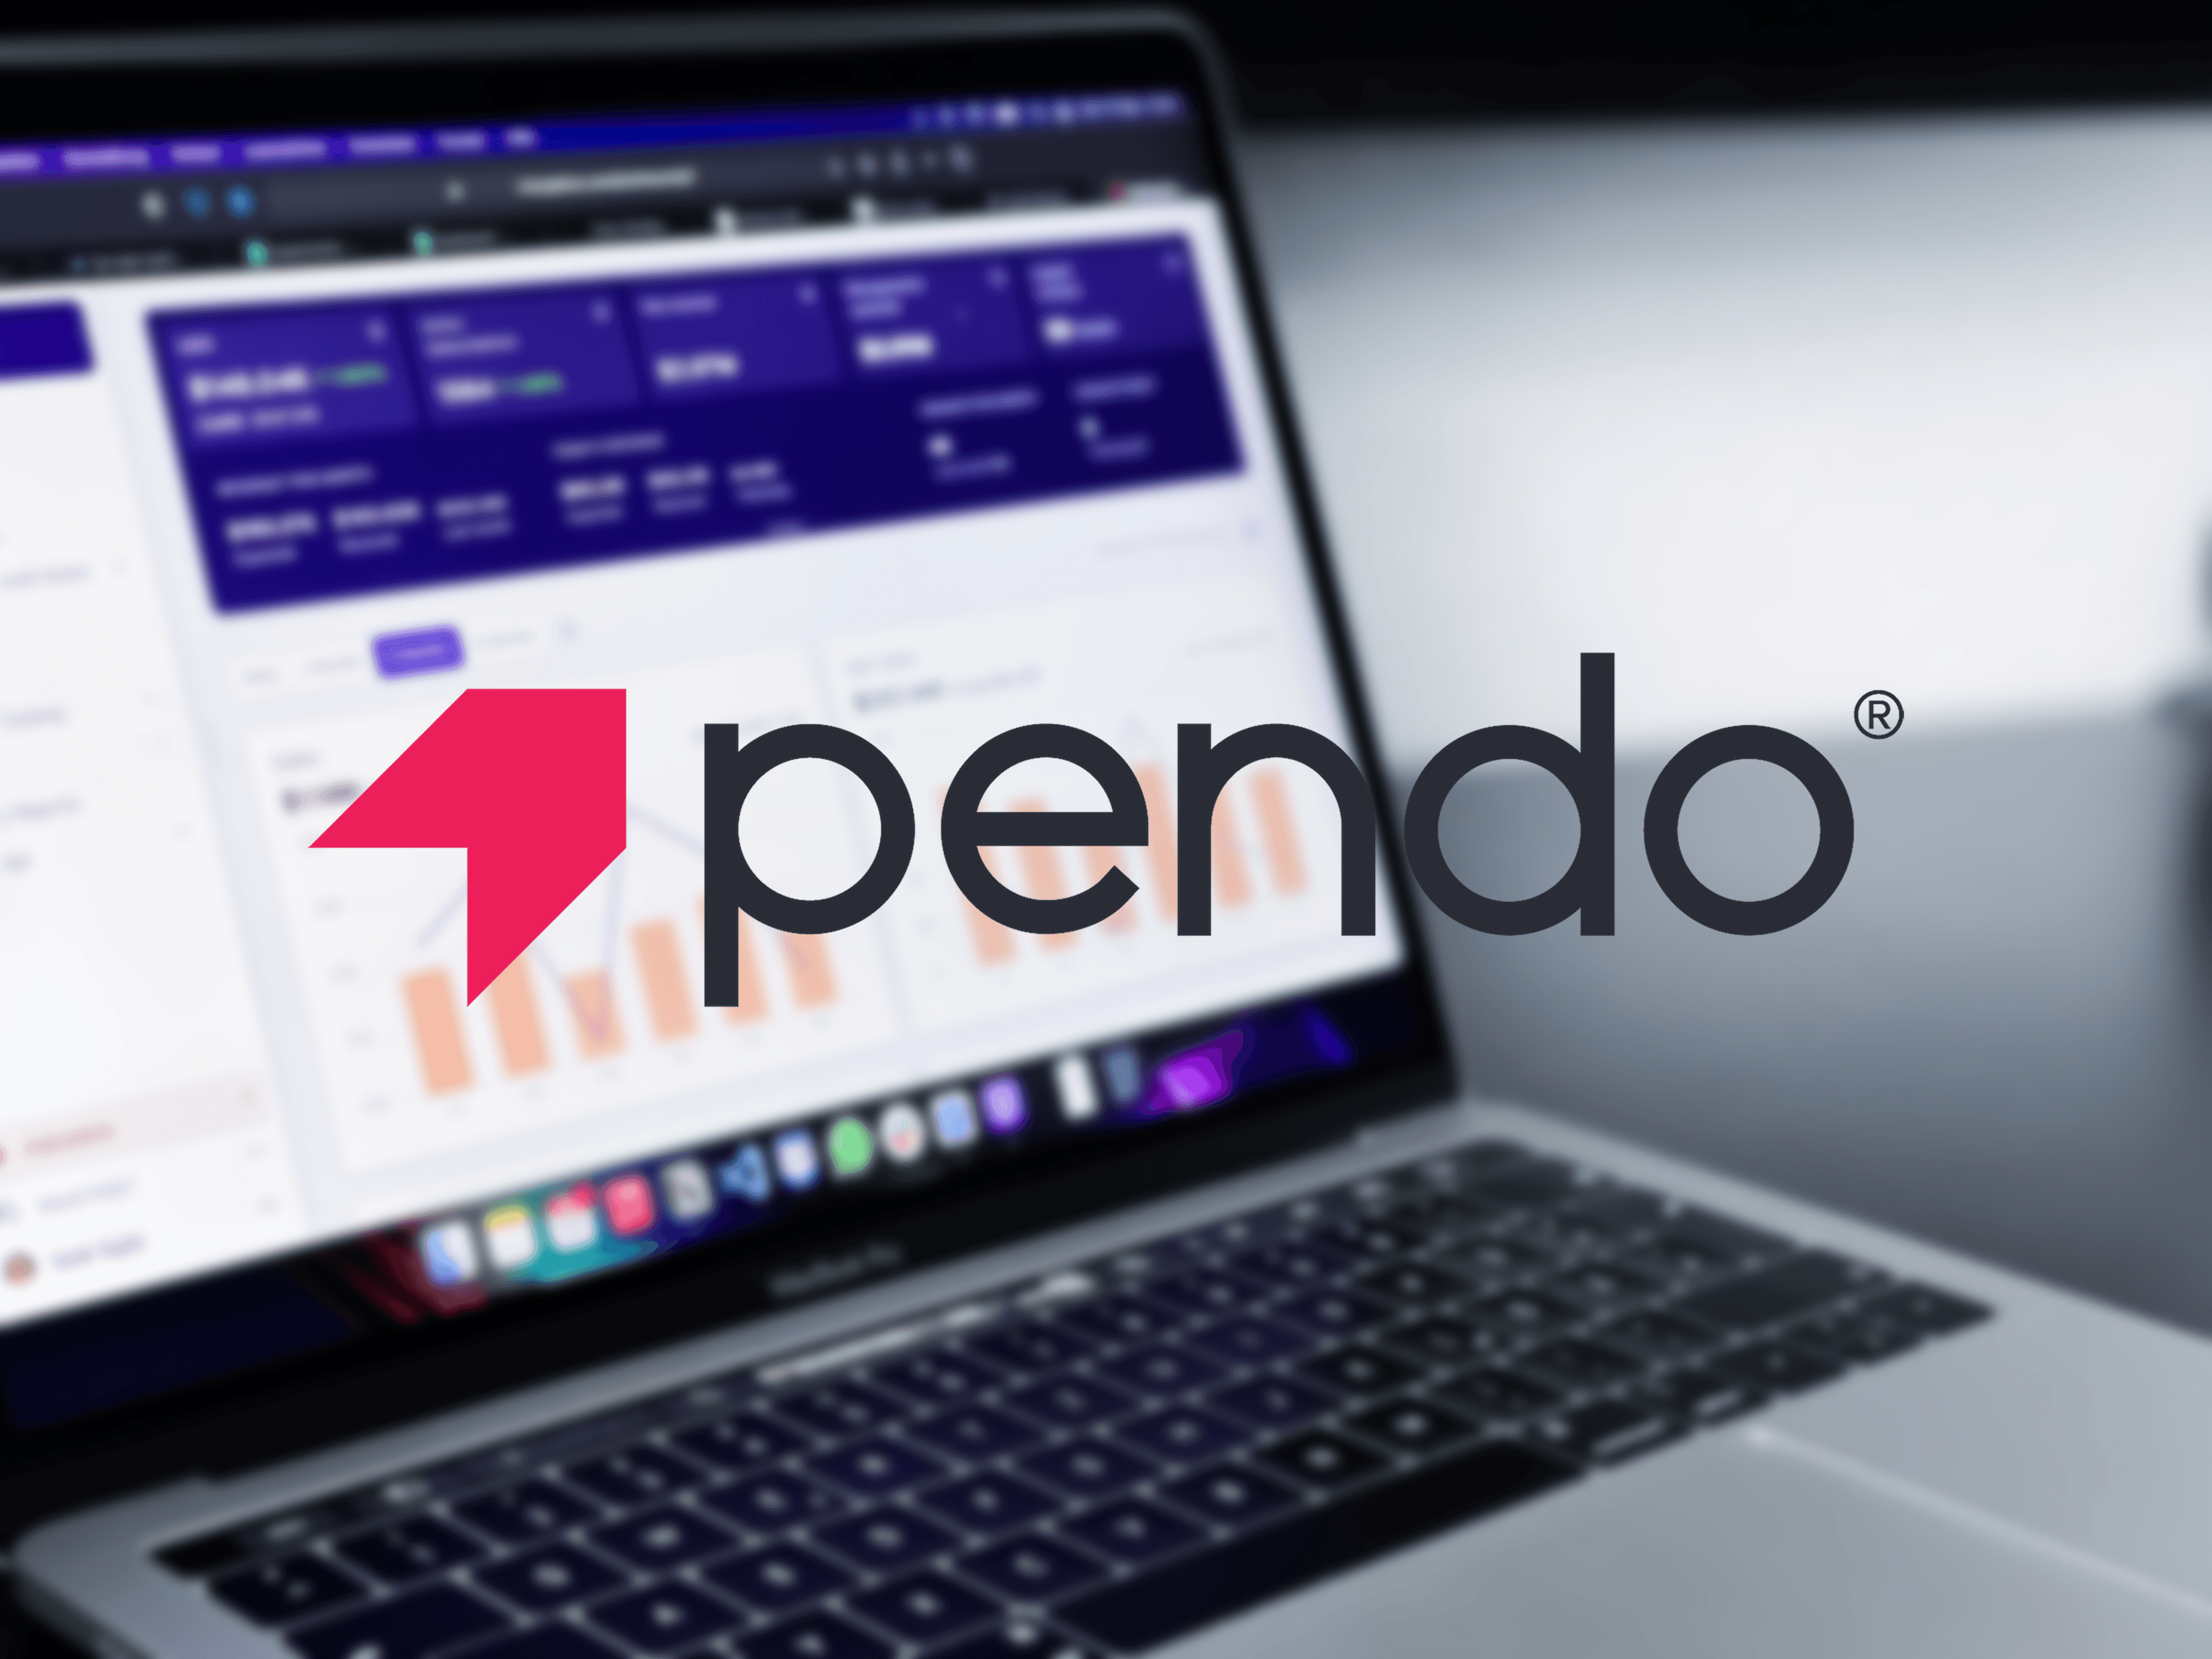 Pendo logo with analytics on laptop screen behind